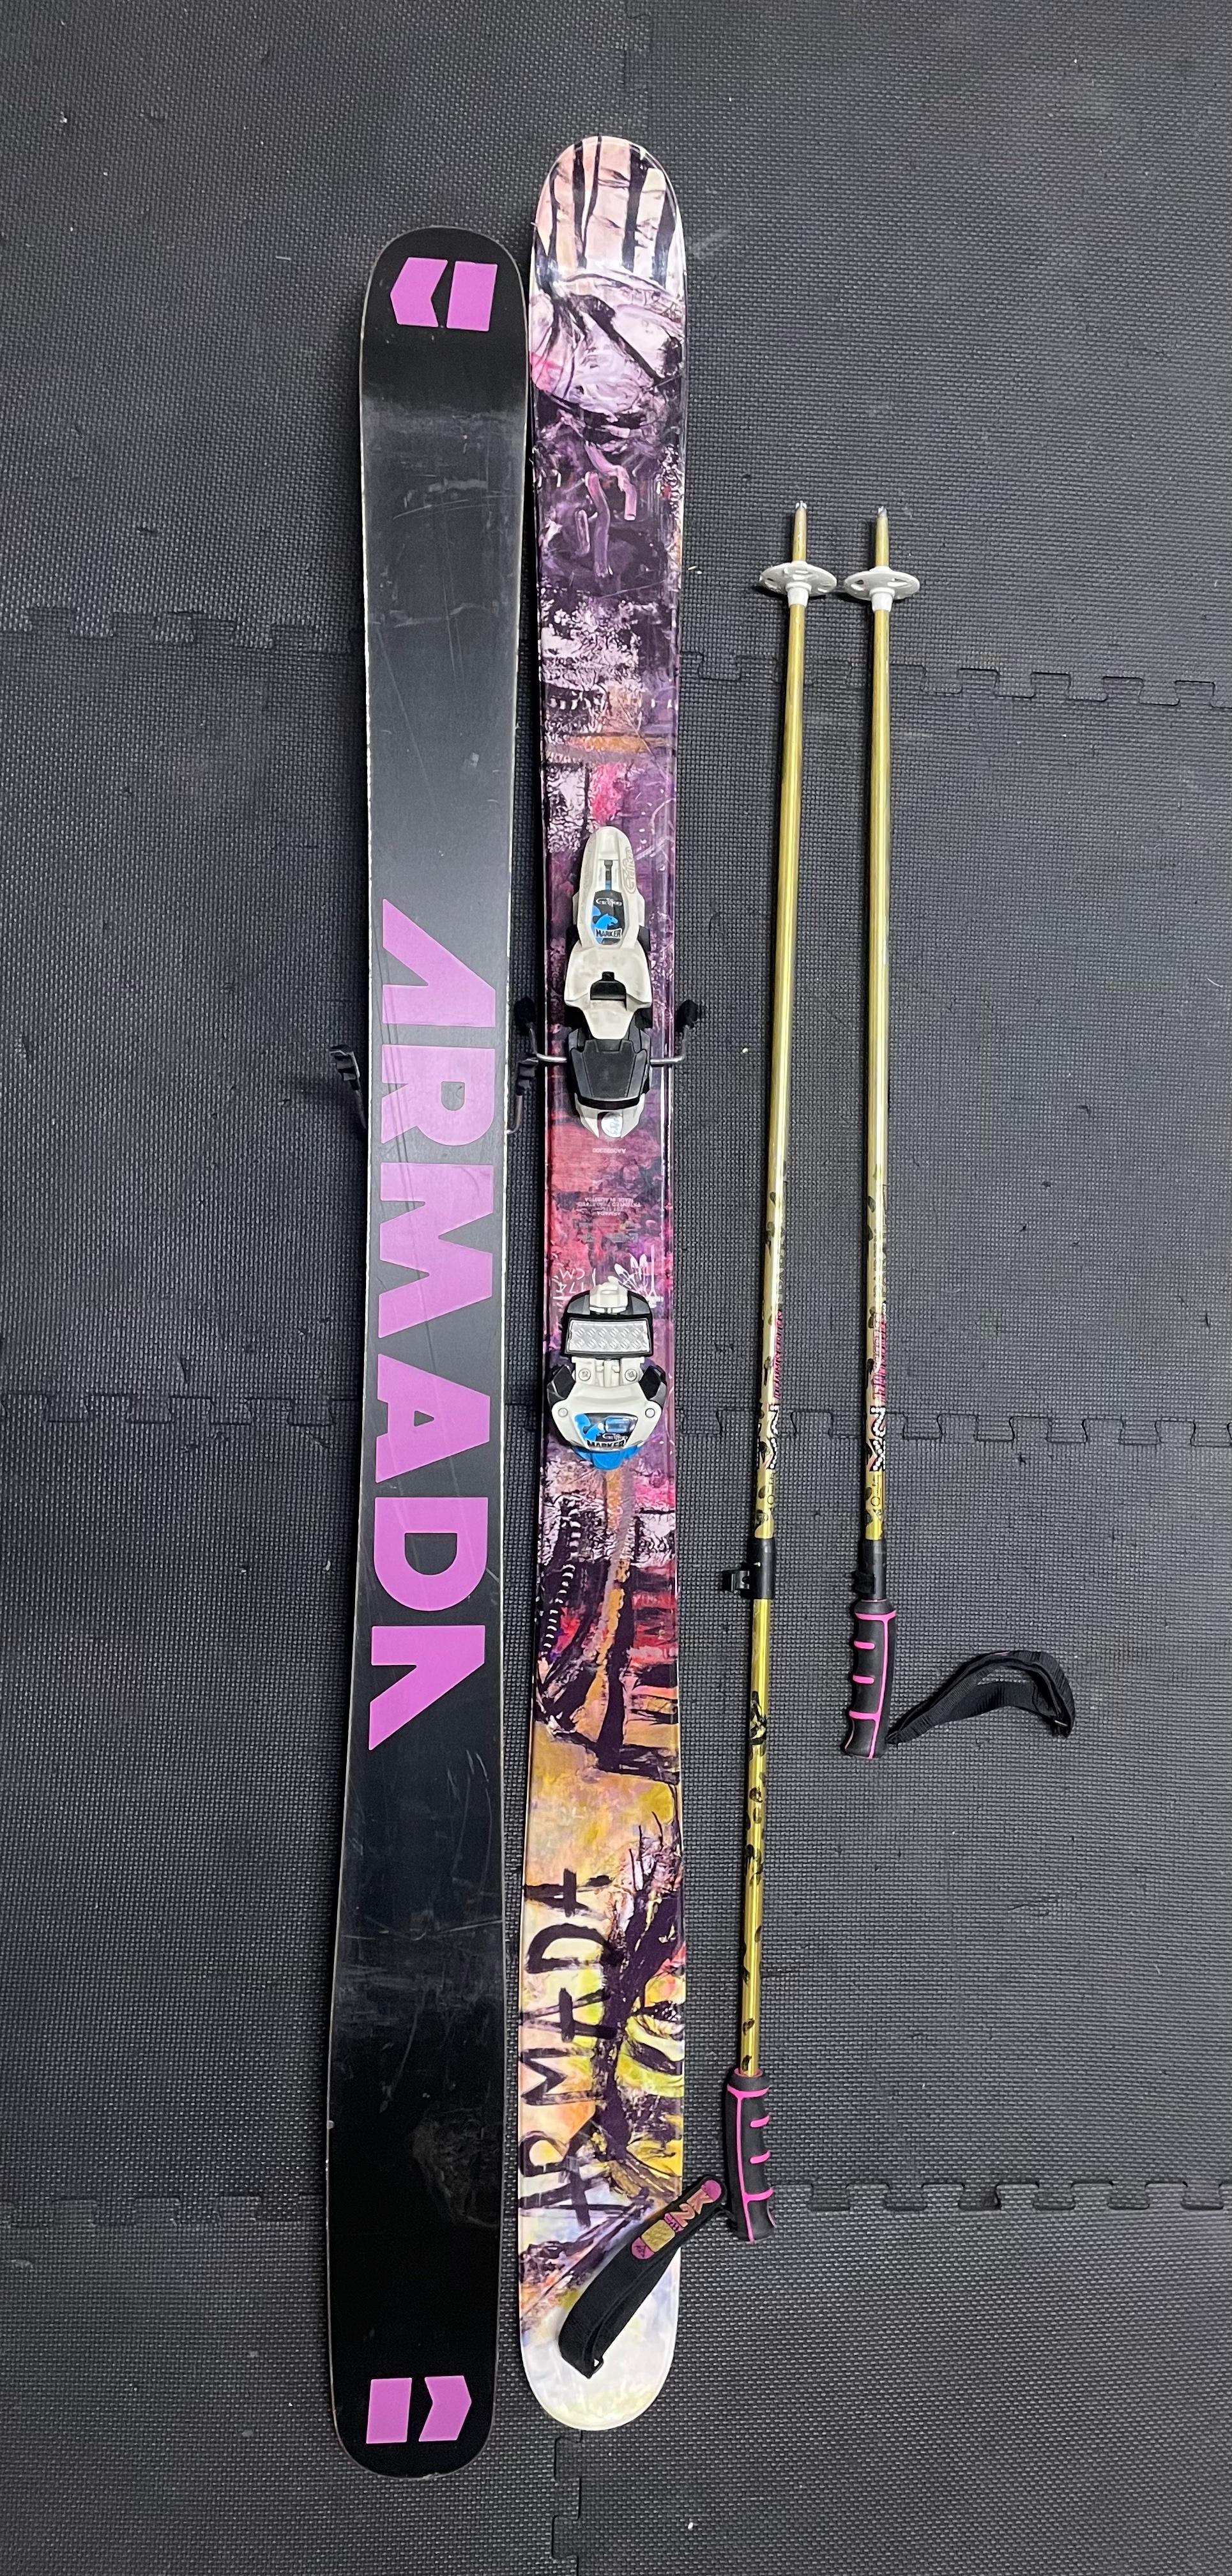 Get yous Ski on!  Armada TST, Marker Griffon and K2 Party Poles in one kit!